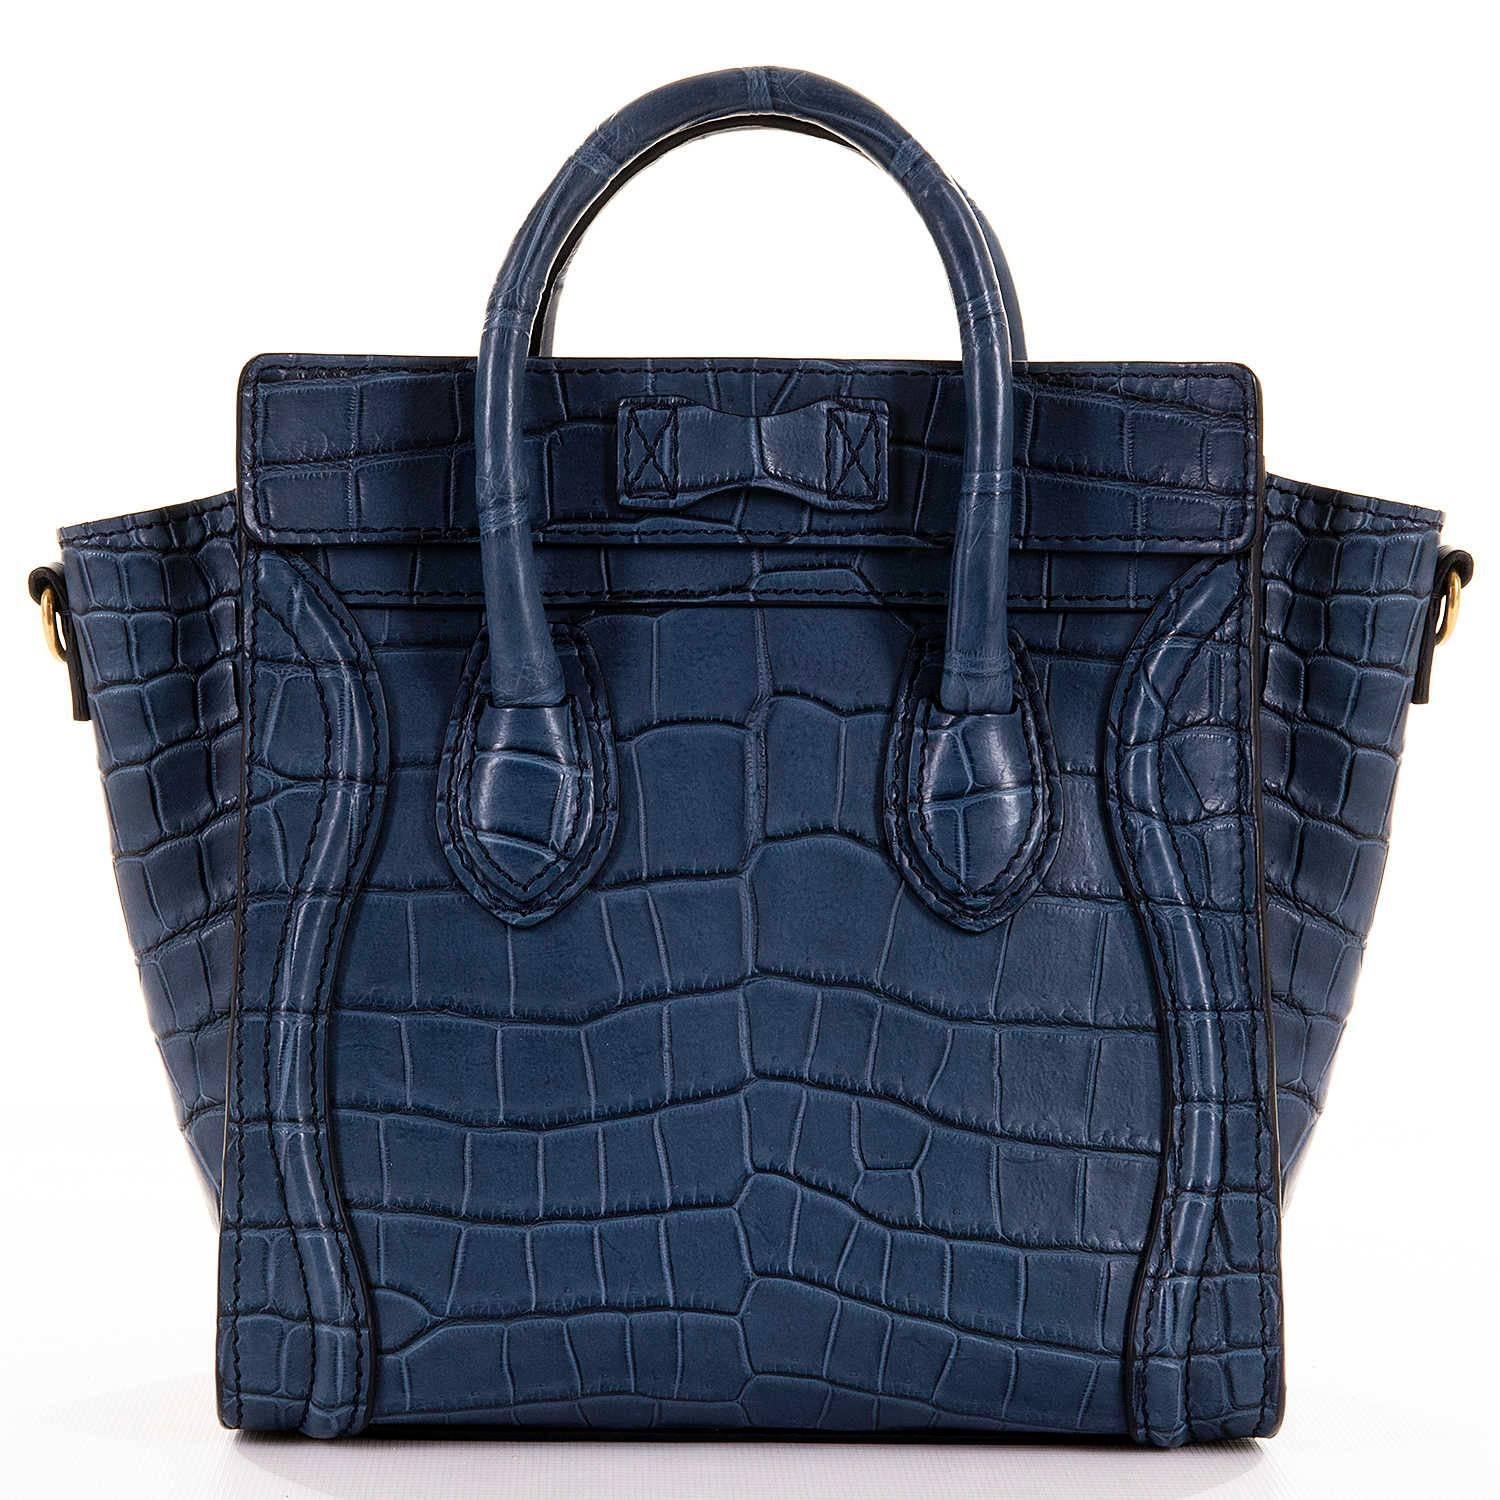 WOW ! This is a rare Bag. A New,  top of the range Celine, 'Nanos' Prussian- Blue, Crocodile Handbag with Goldtone Hardware. Fitted with a matching detachable shoulder strap, the bag can be worn in hand or on the shoulder. This 2015 Bag is brand new